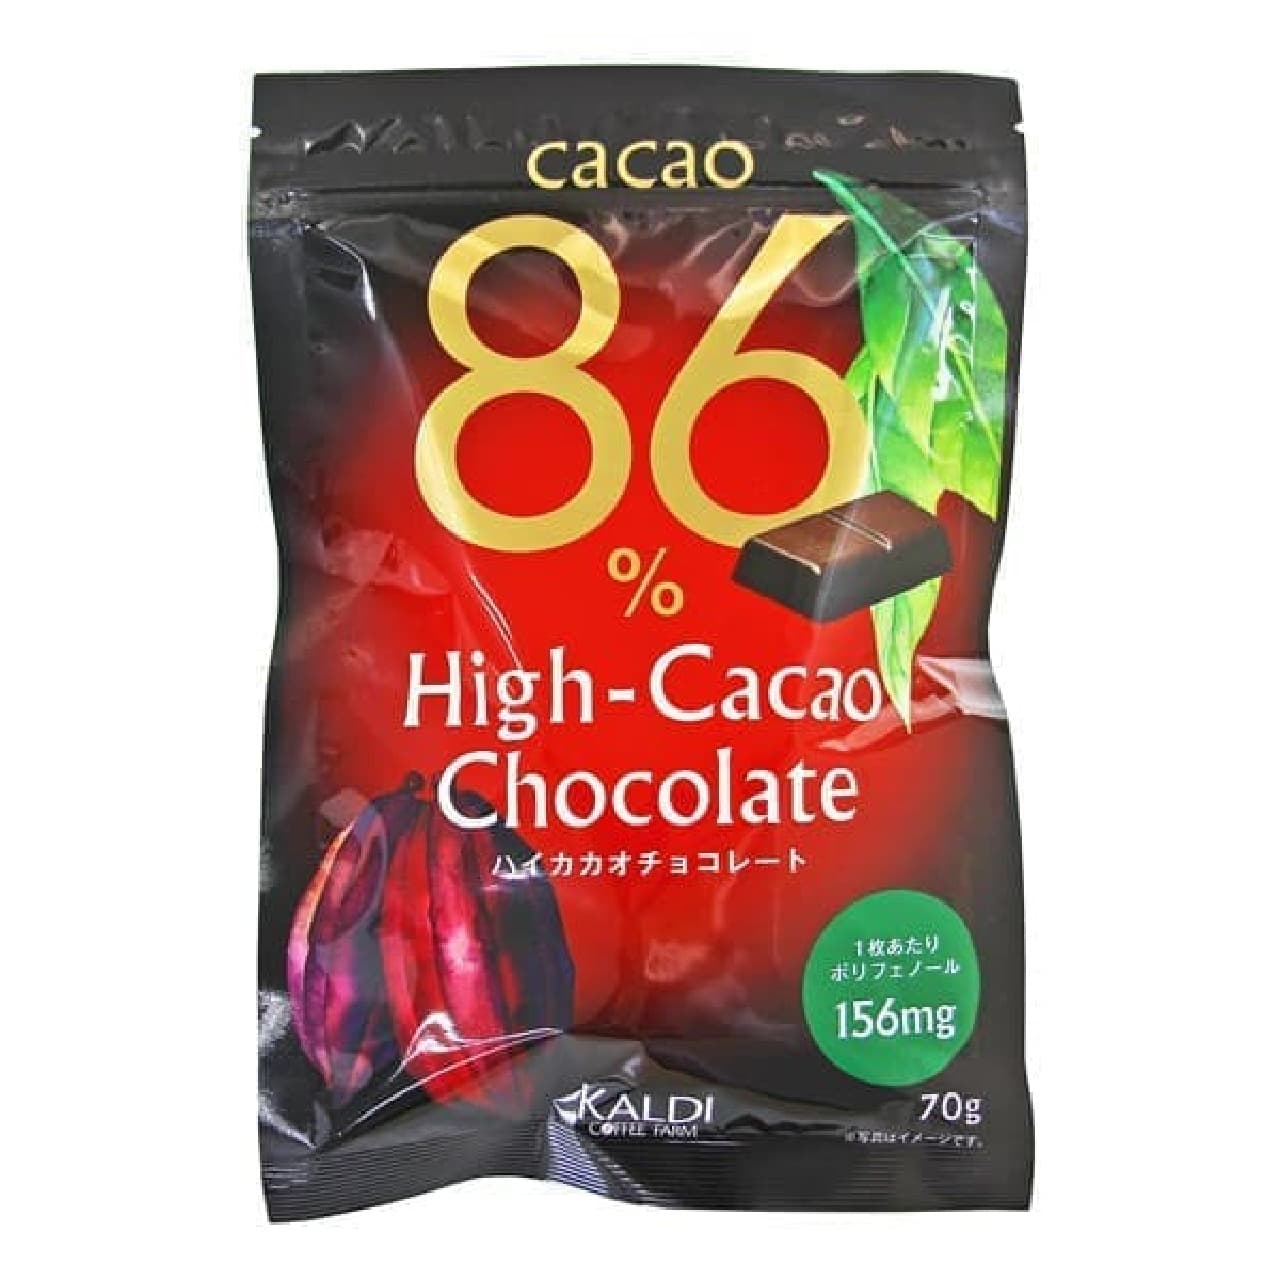 "High cacao chocolate" with 86% cacao content in KALDI